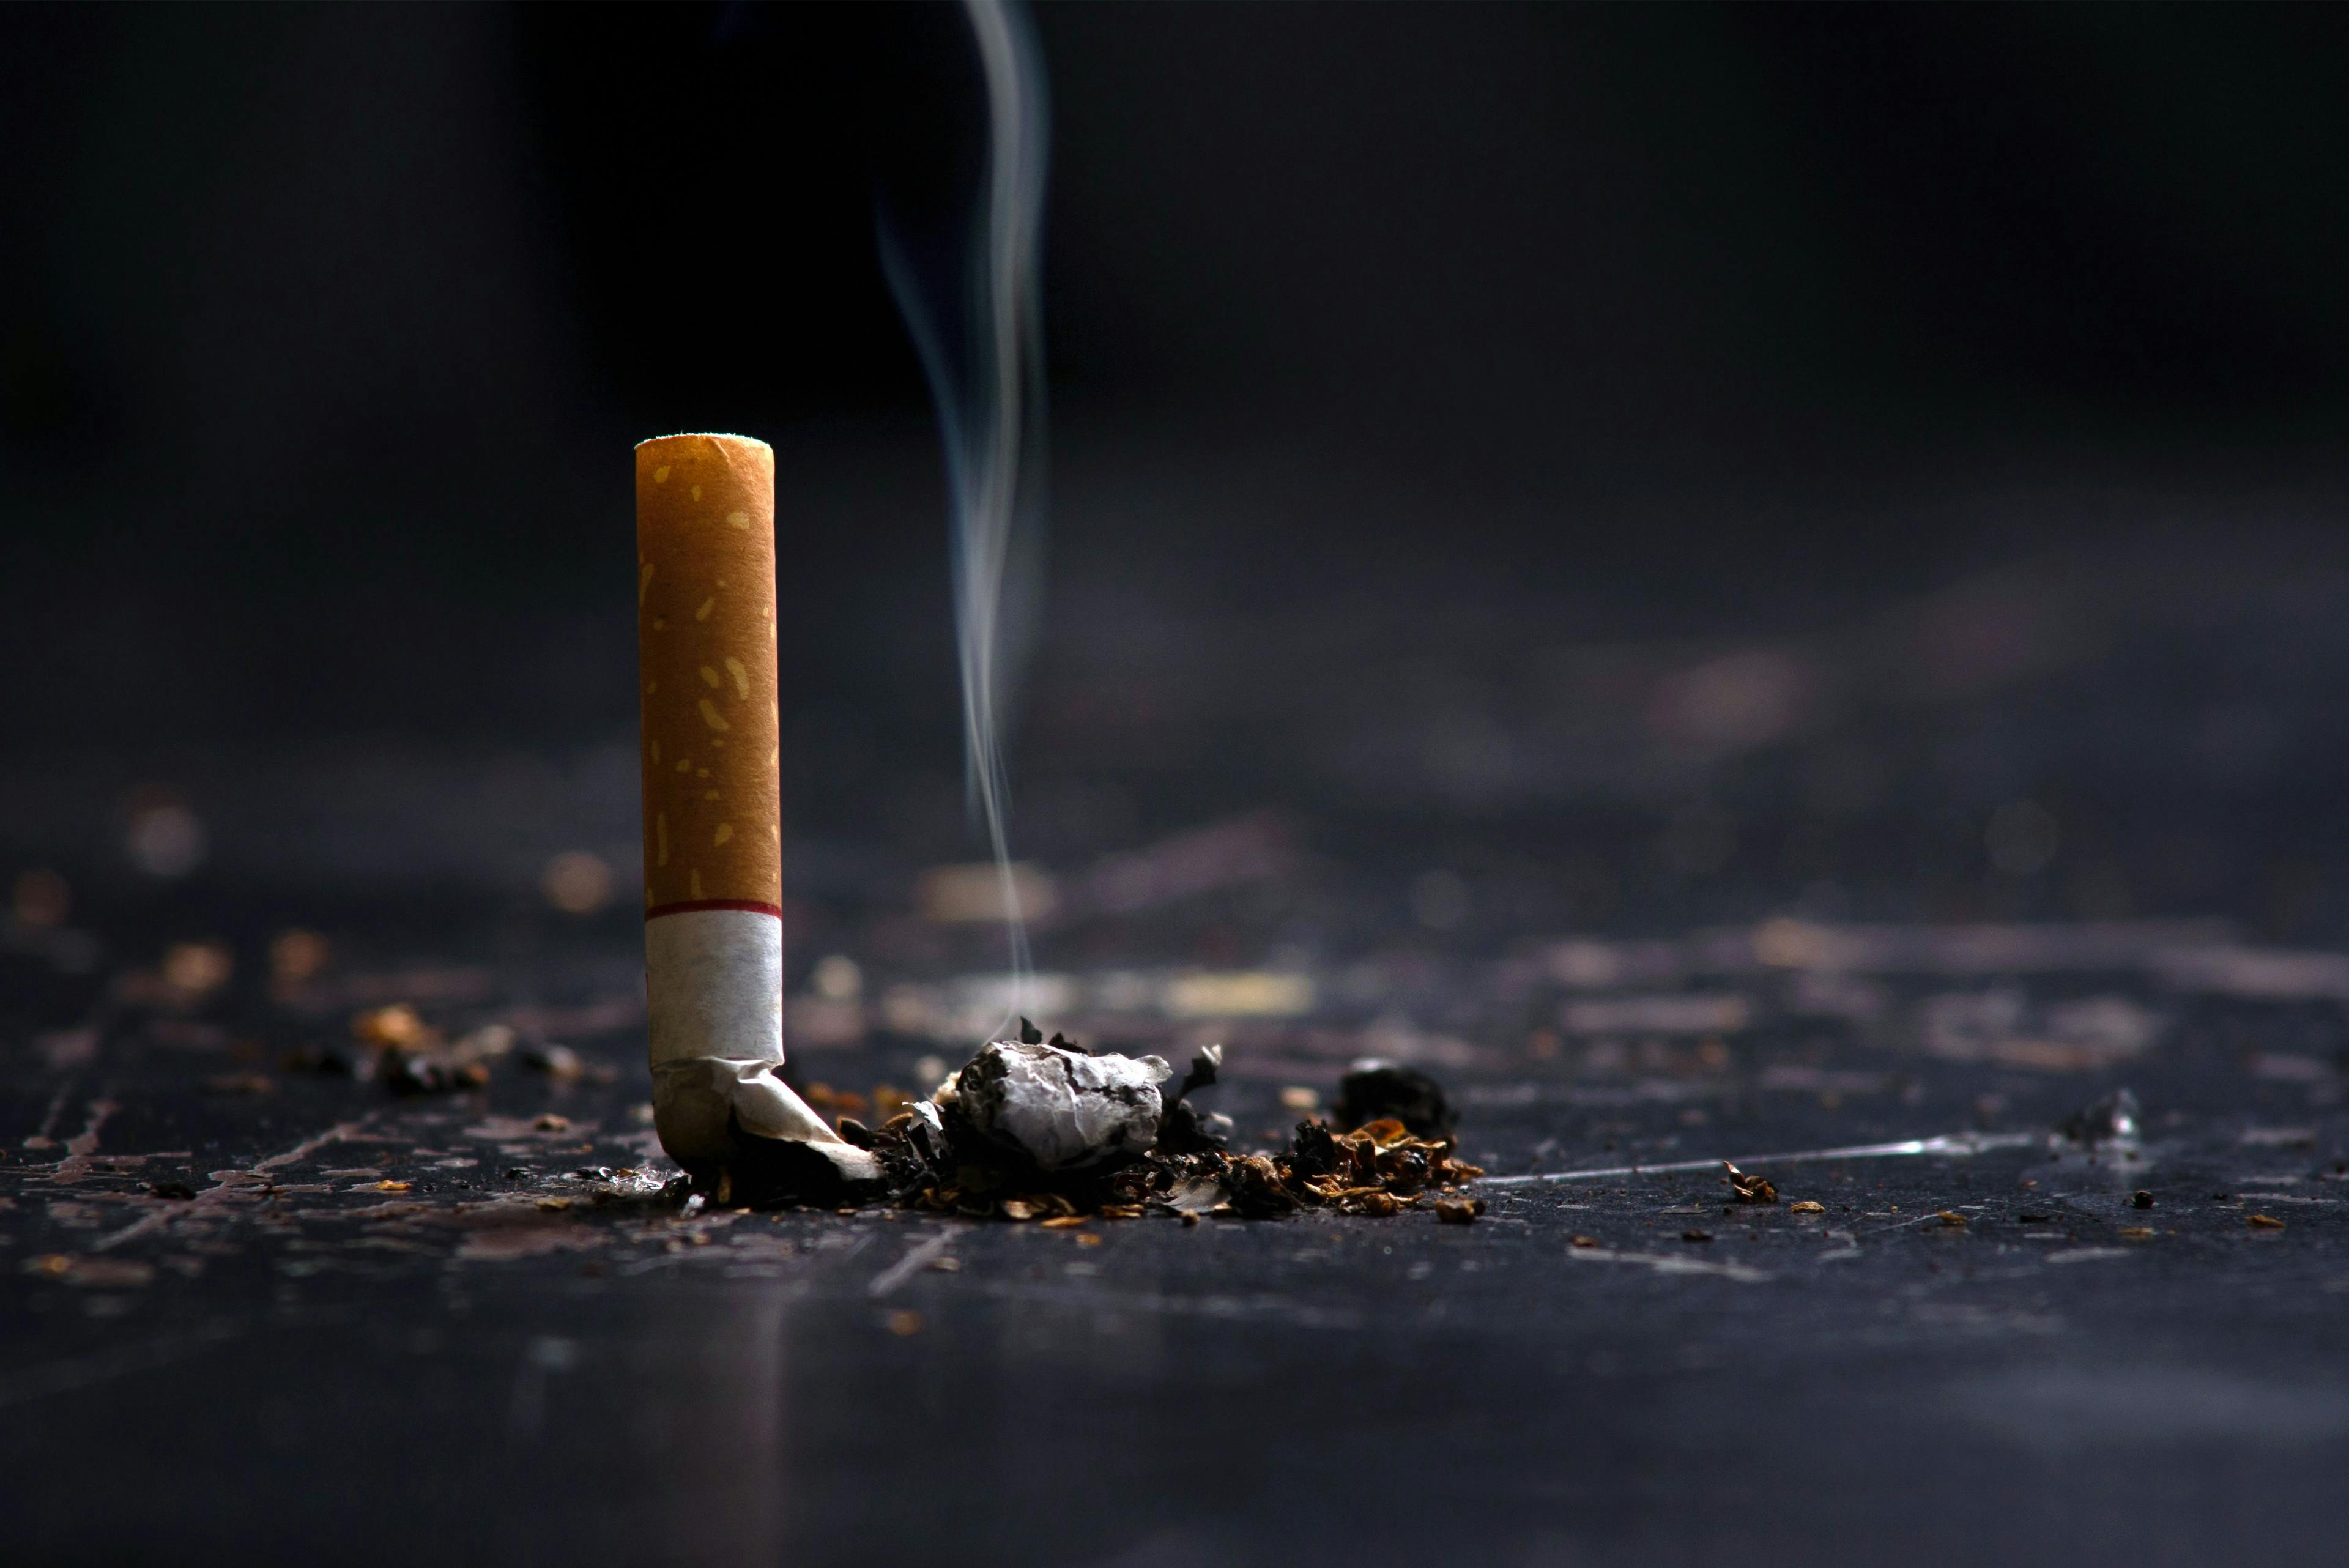 World No Tobacco Day Concept Stop Smoking.tobacco cigarette butt on the floor | | Image credit: Pcess609 - stock.adobe.com